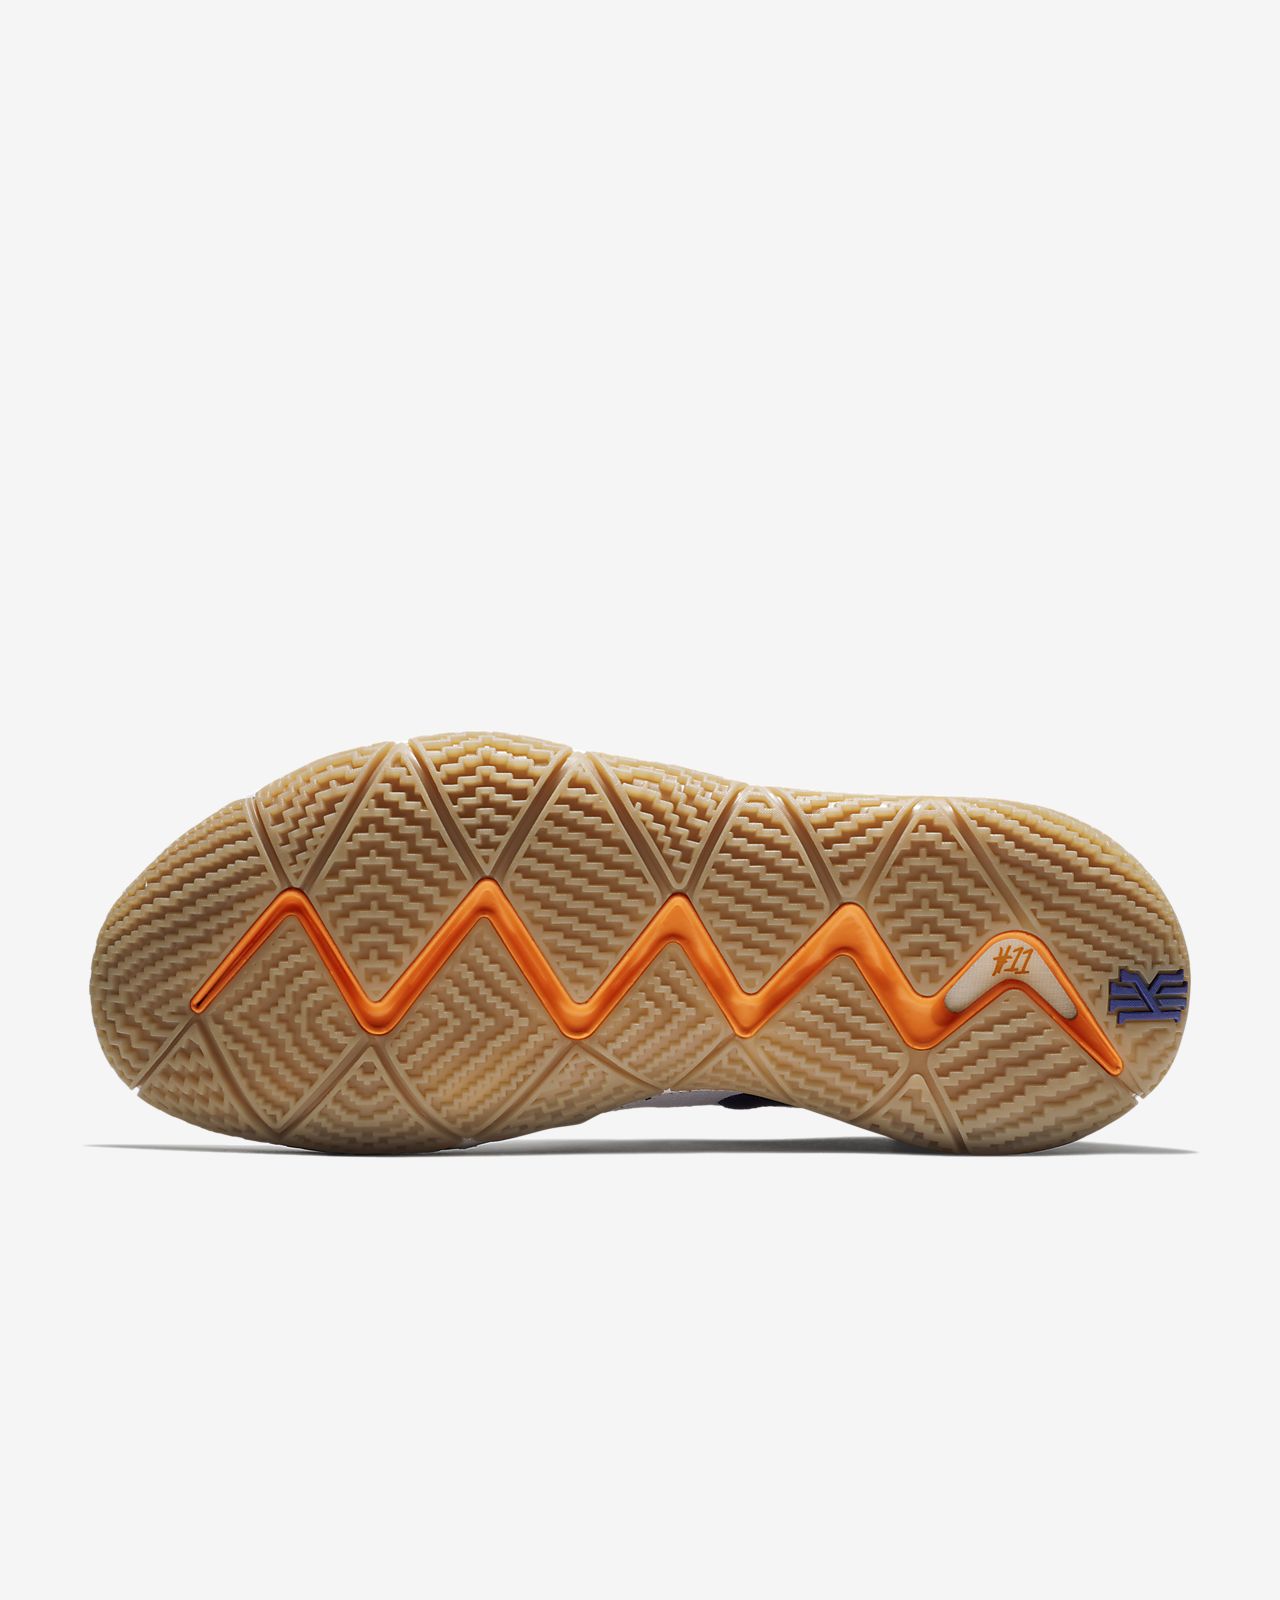 kyrie 4 uncle drew